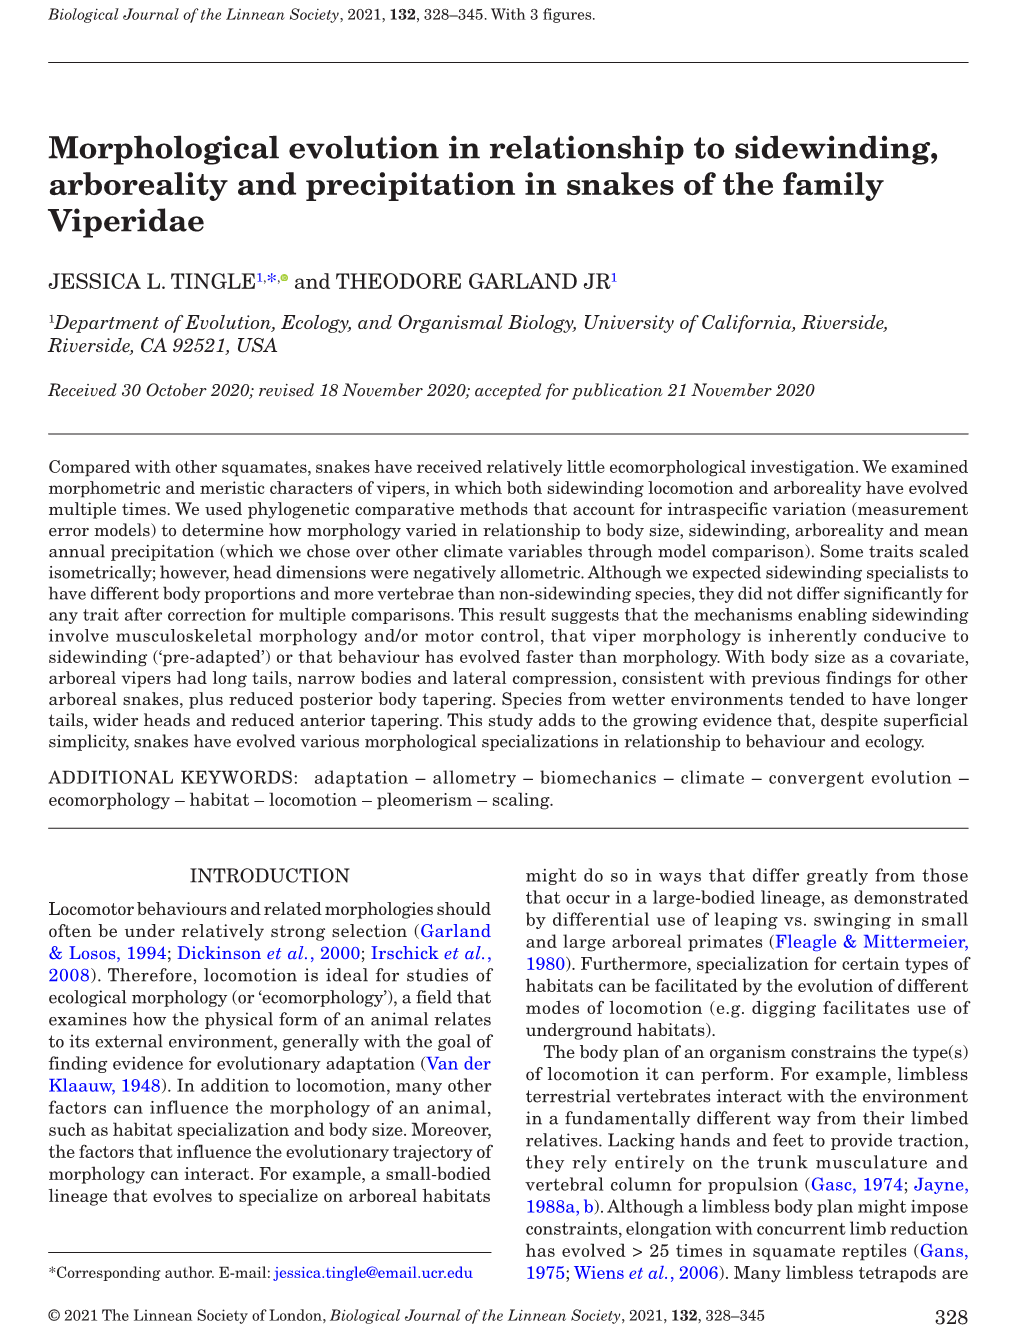 Morphological Evolution in Relationship to Sidewinding, Arboreality and Precipitation in Snakes of the Family Viperidae